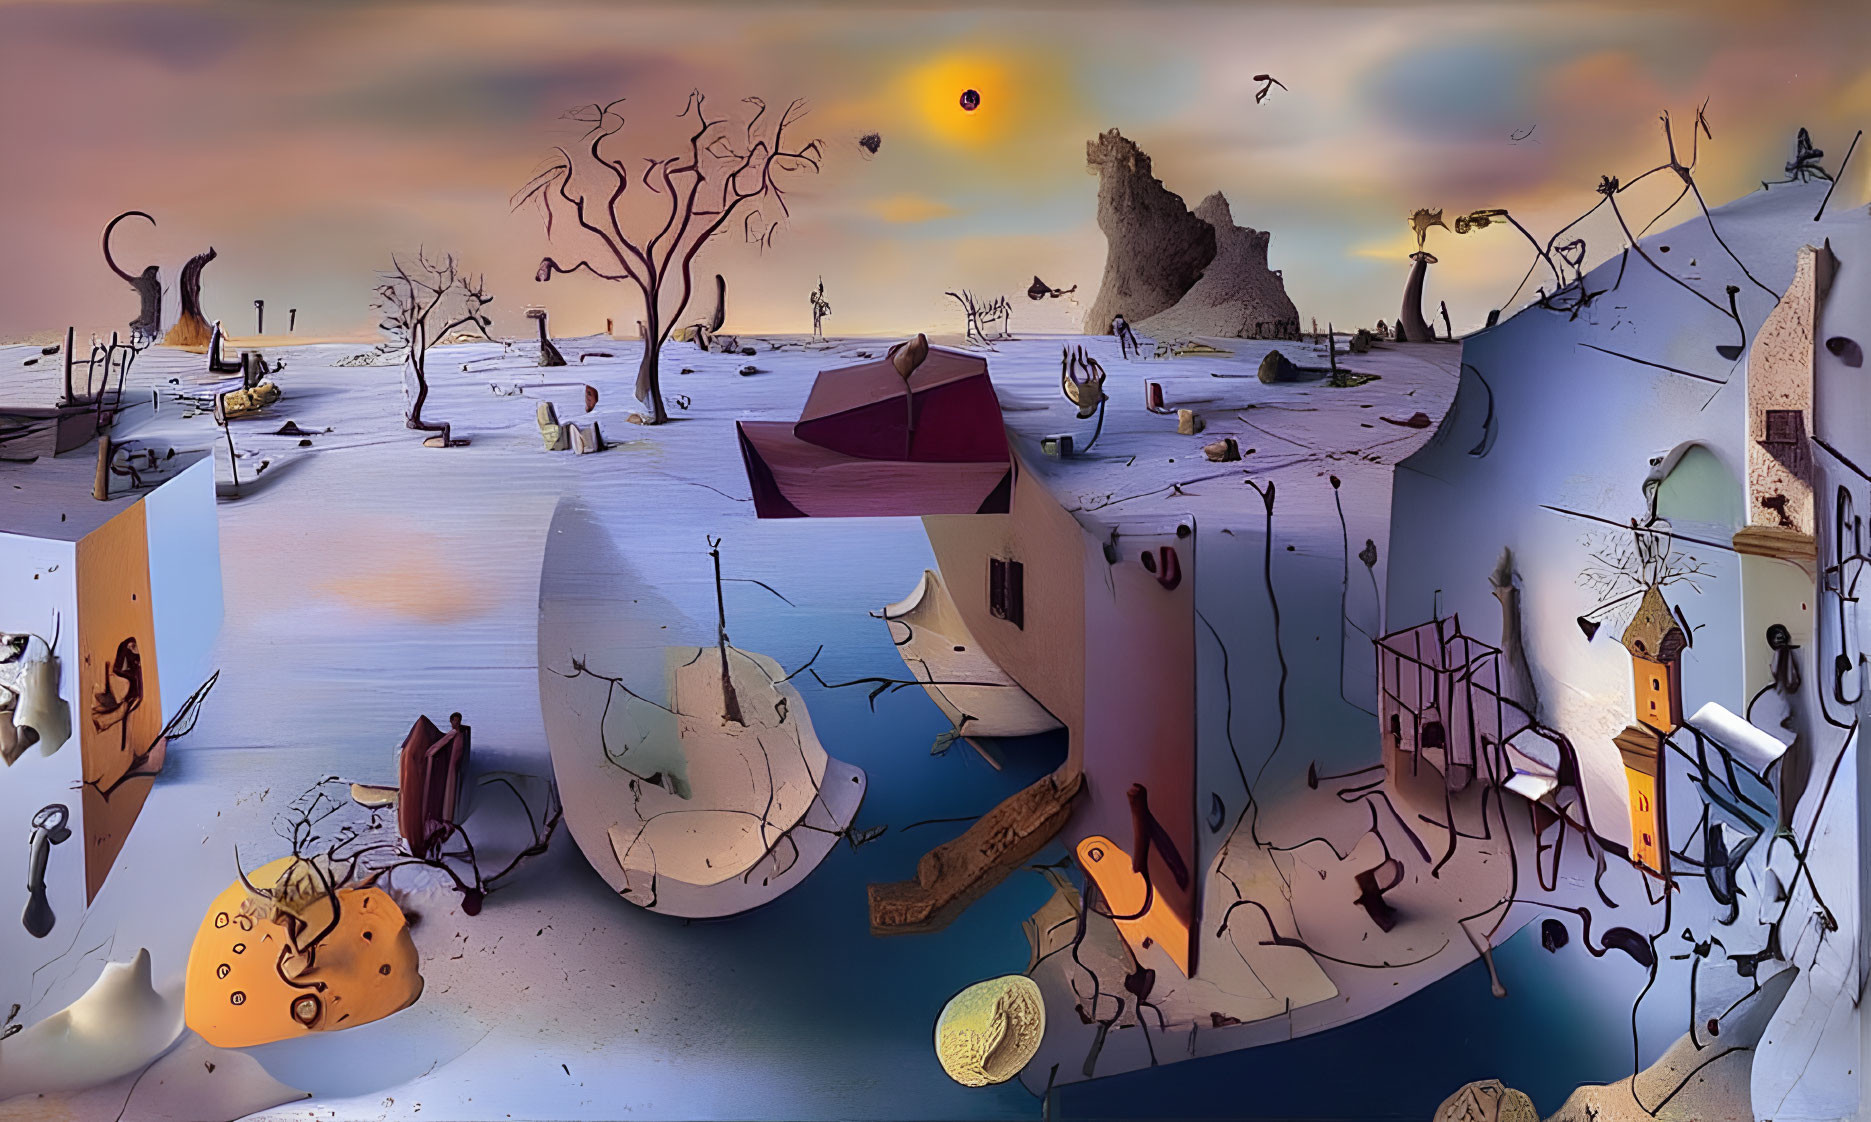 Surreal landscape with distorted houses, barren trees, and desert terrain under dusky sky